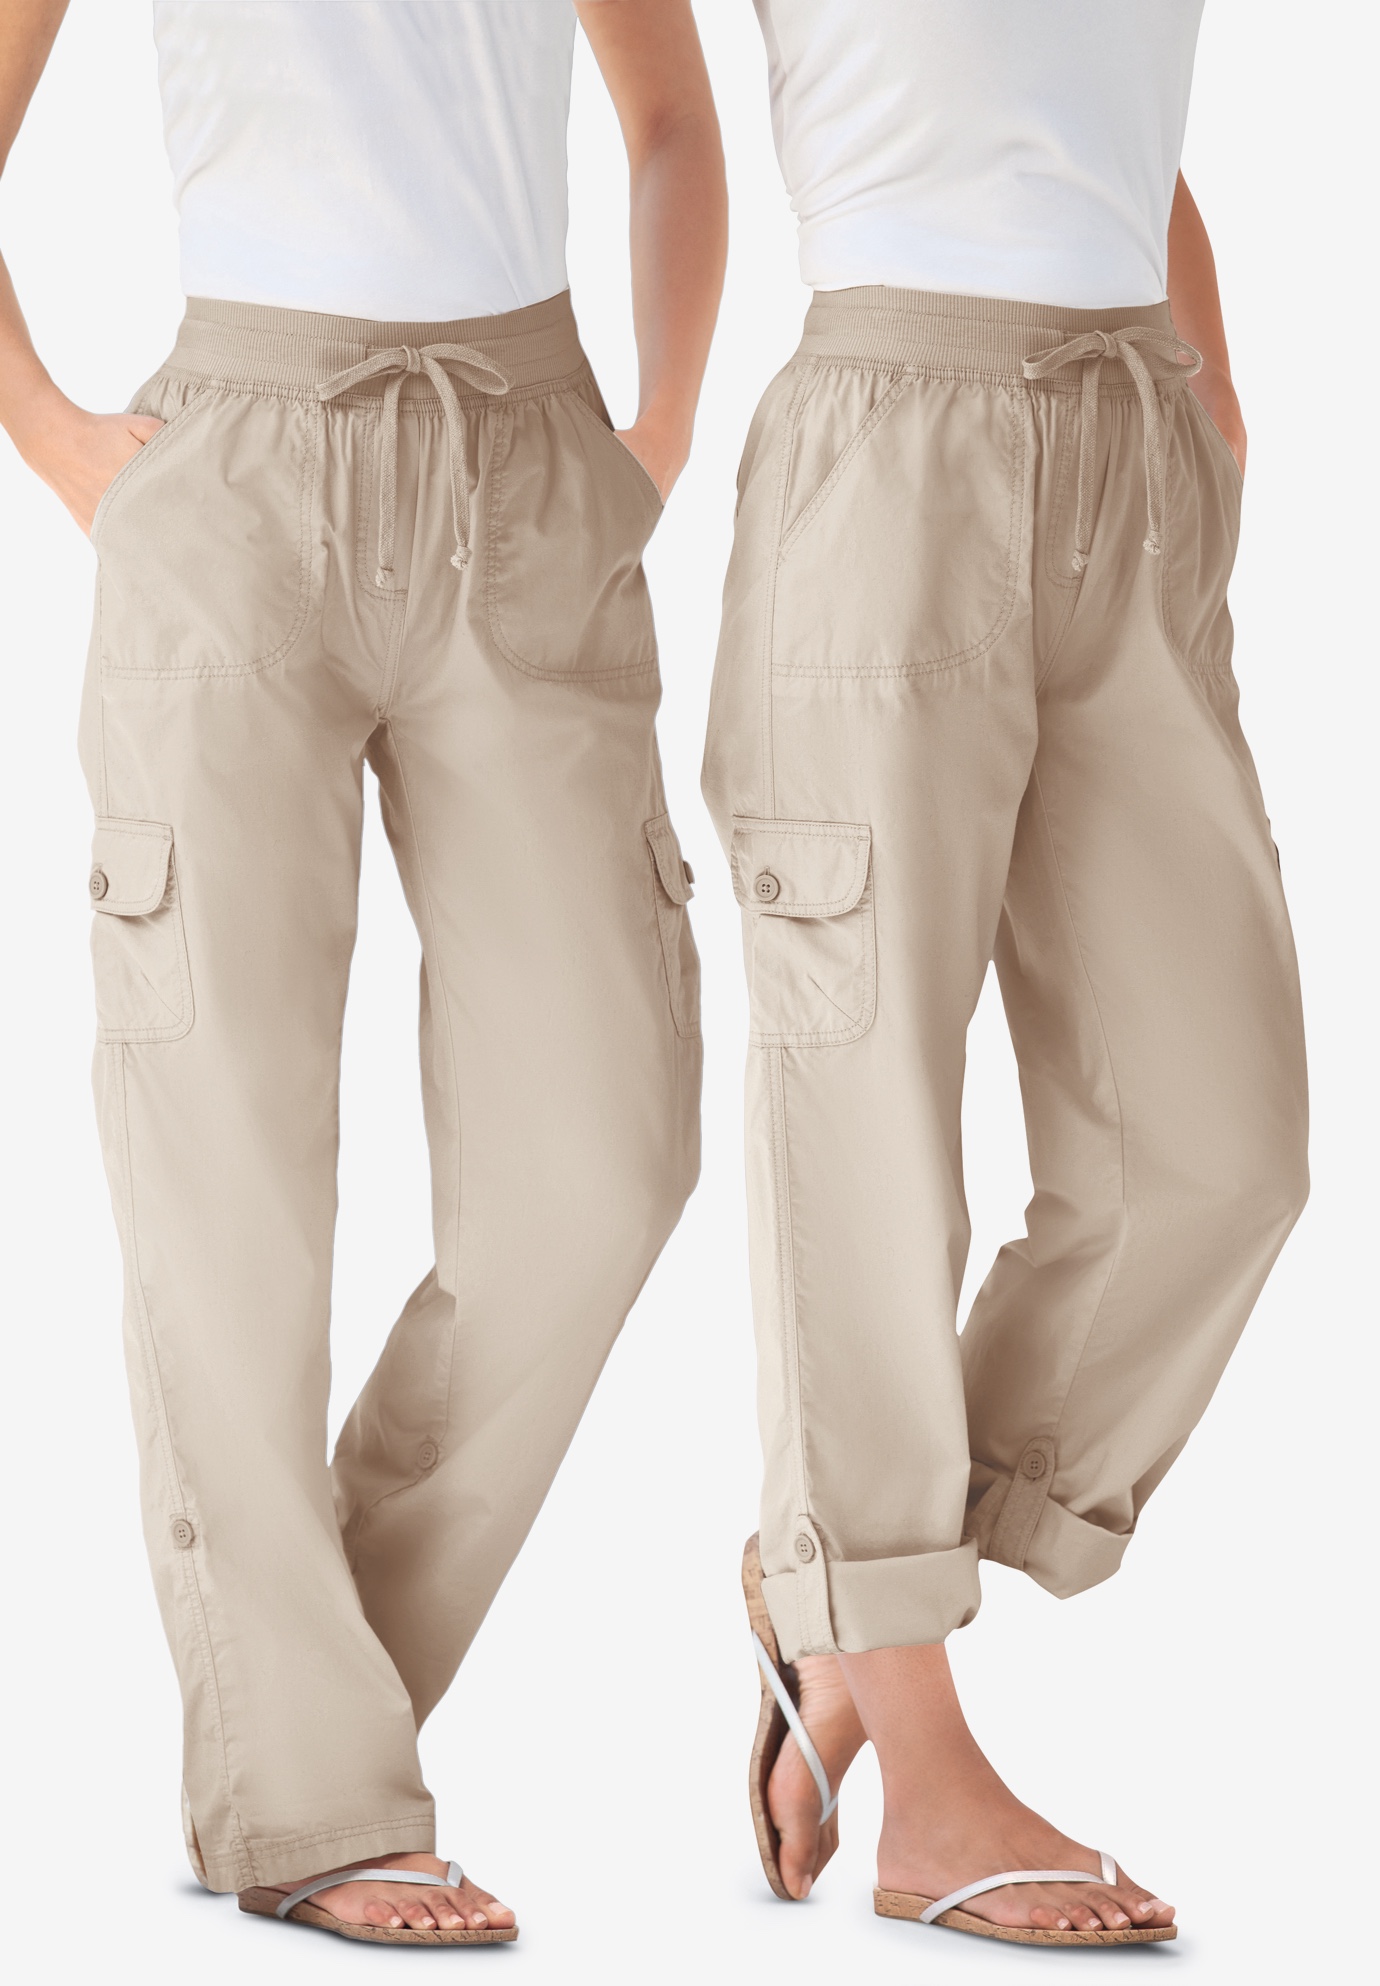 womens cargo capris clearance